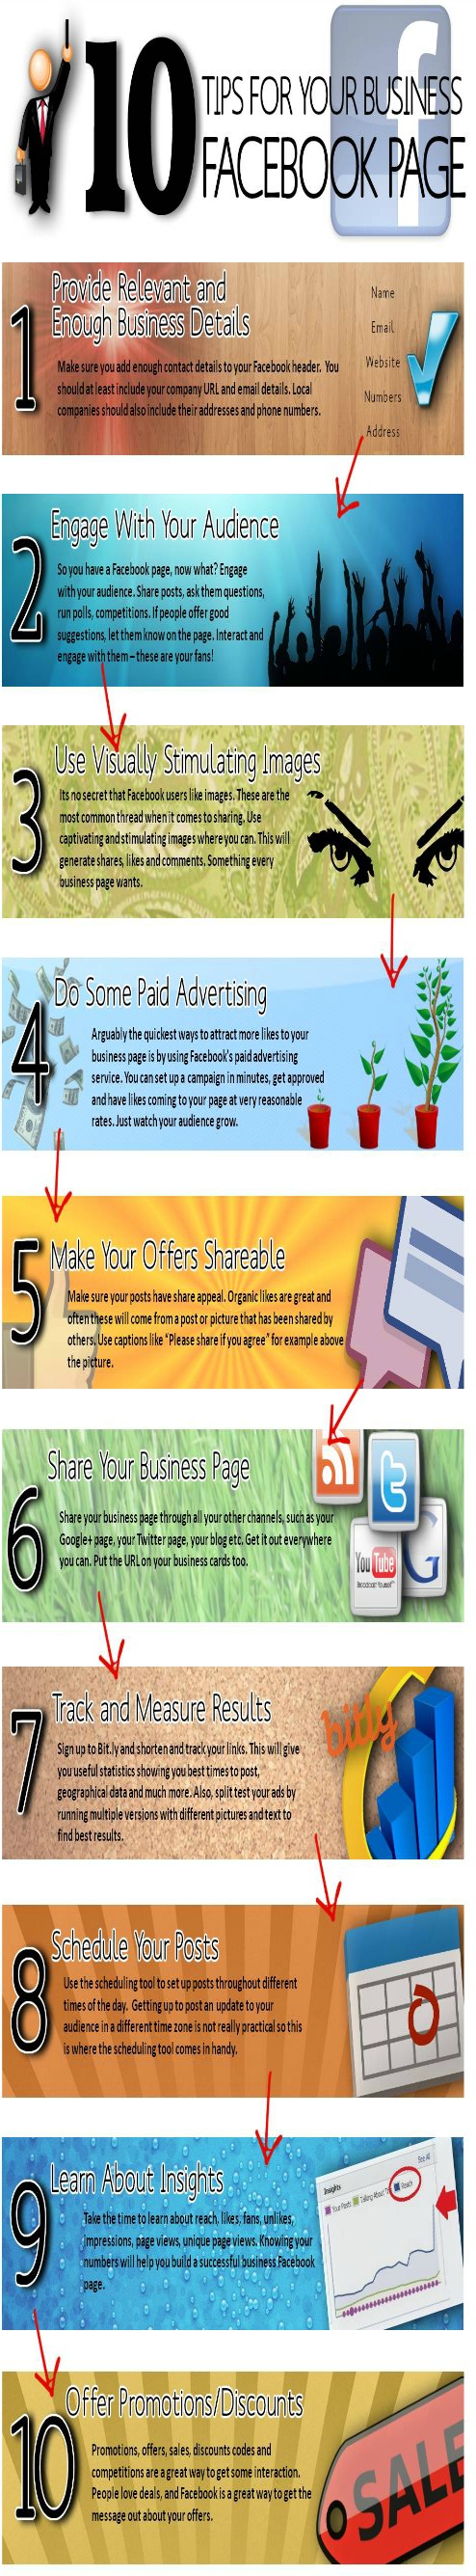 10-FB-Tips-INFOGRAPHIC